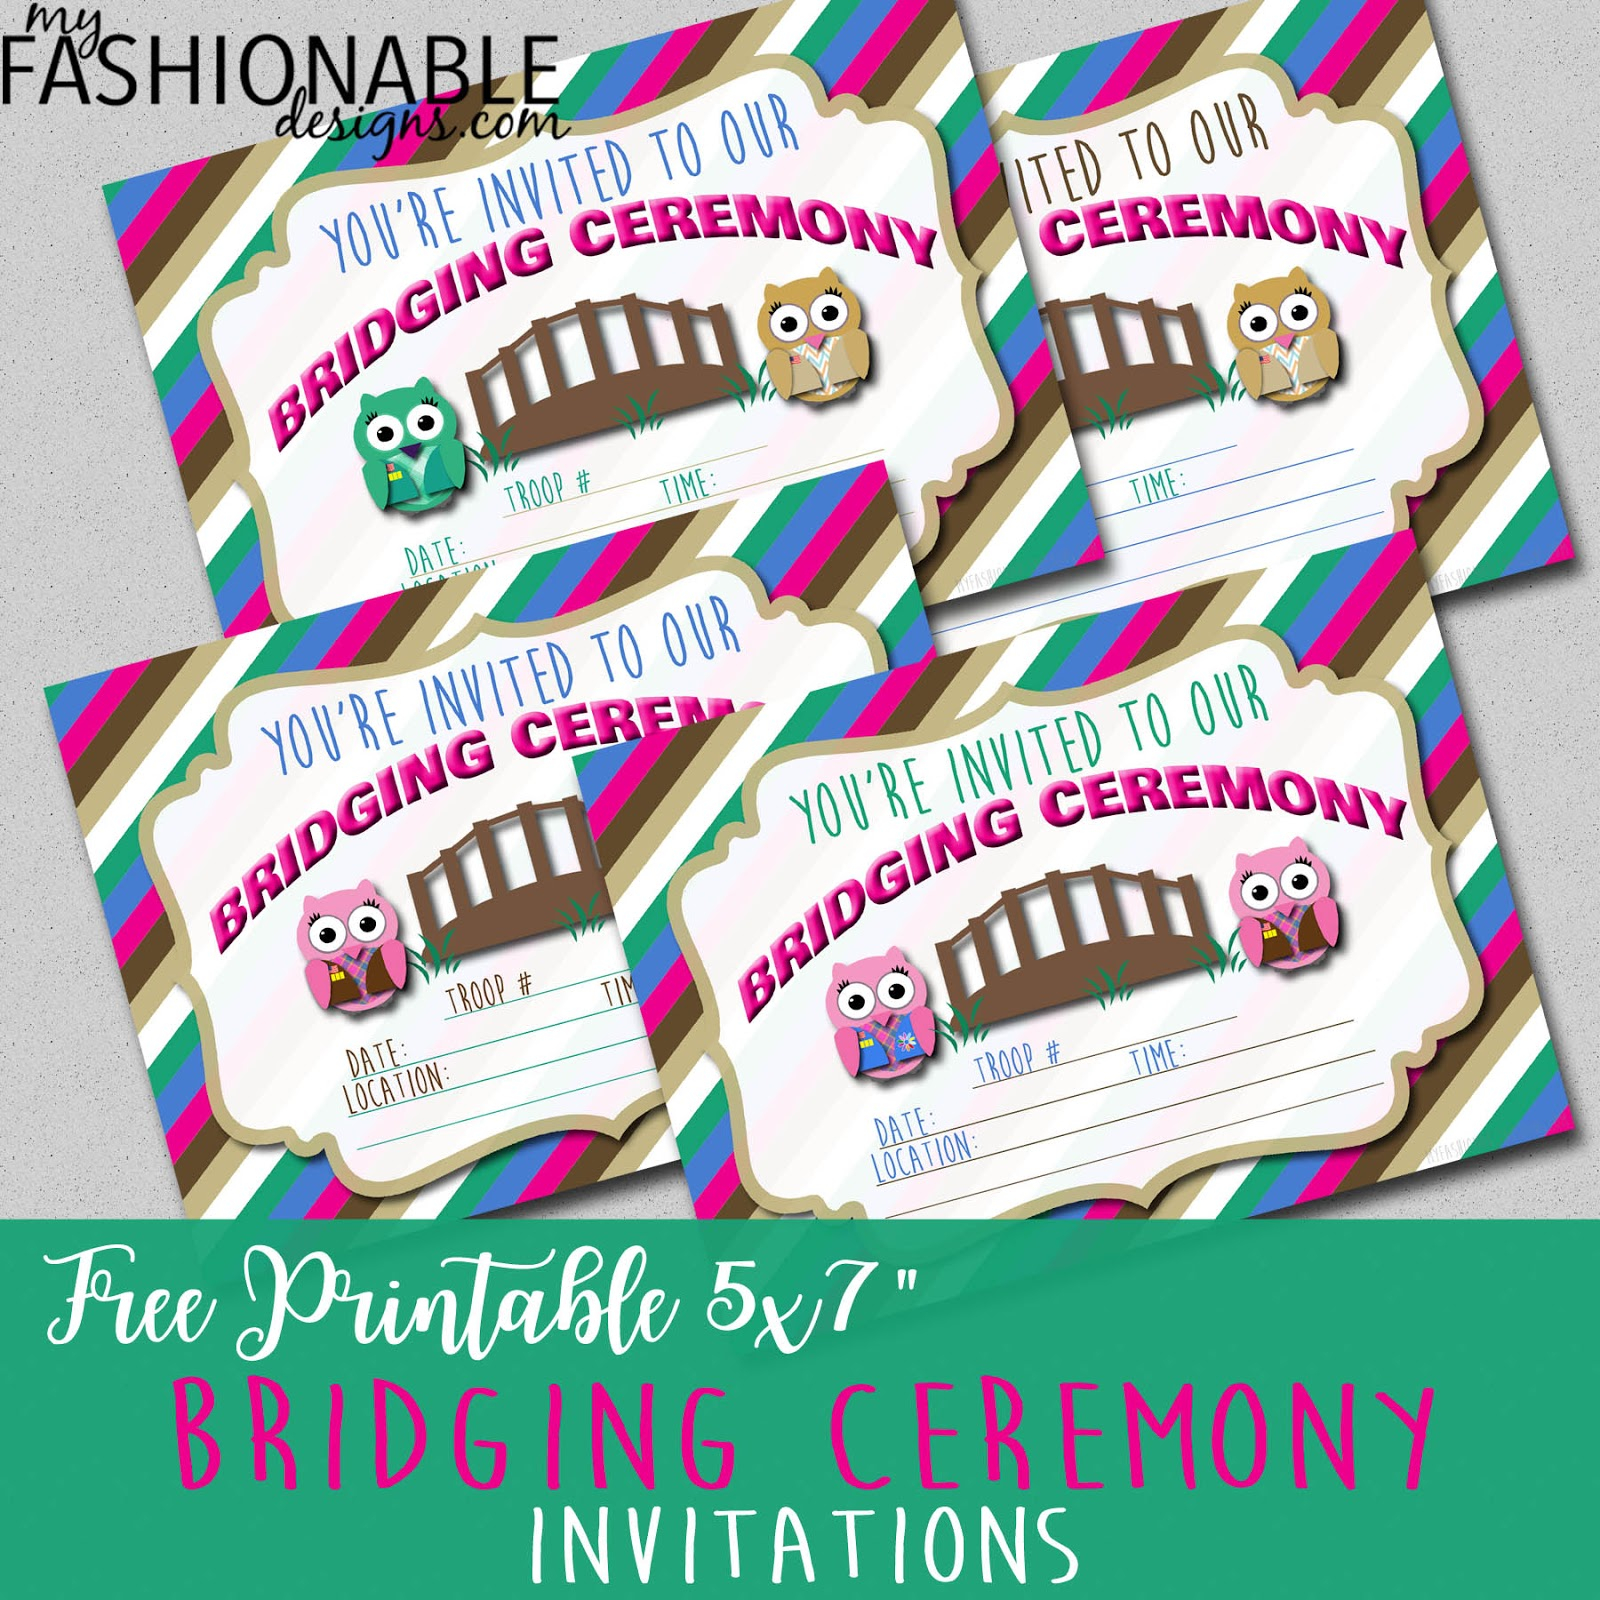 My Fashionable Designs Free Printable Bridging Ceremony Invitations within dimensions 1600 X 1600